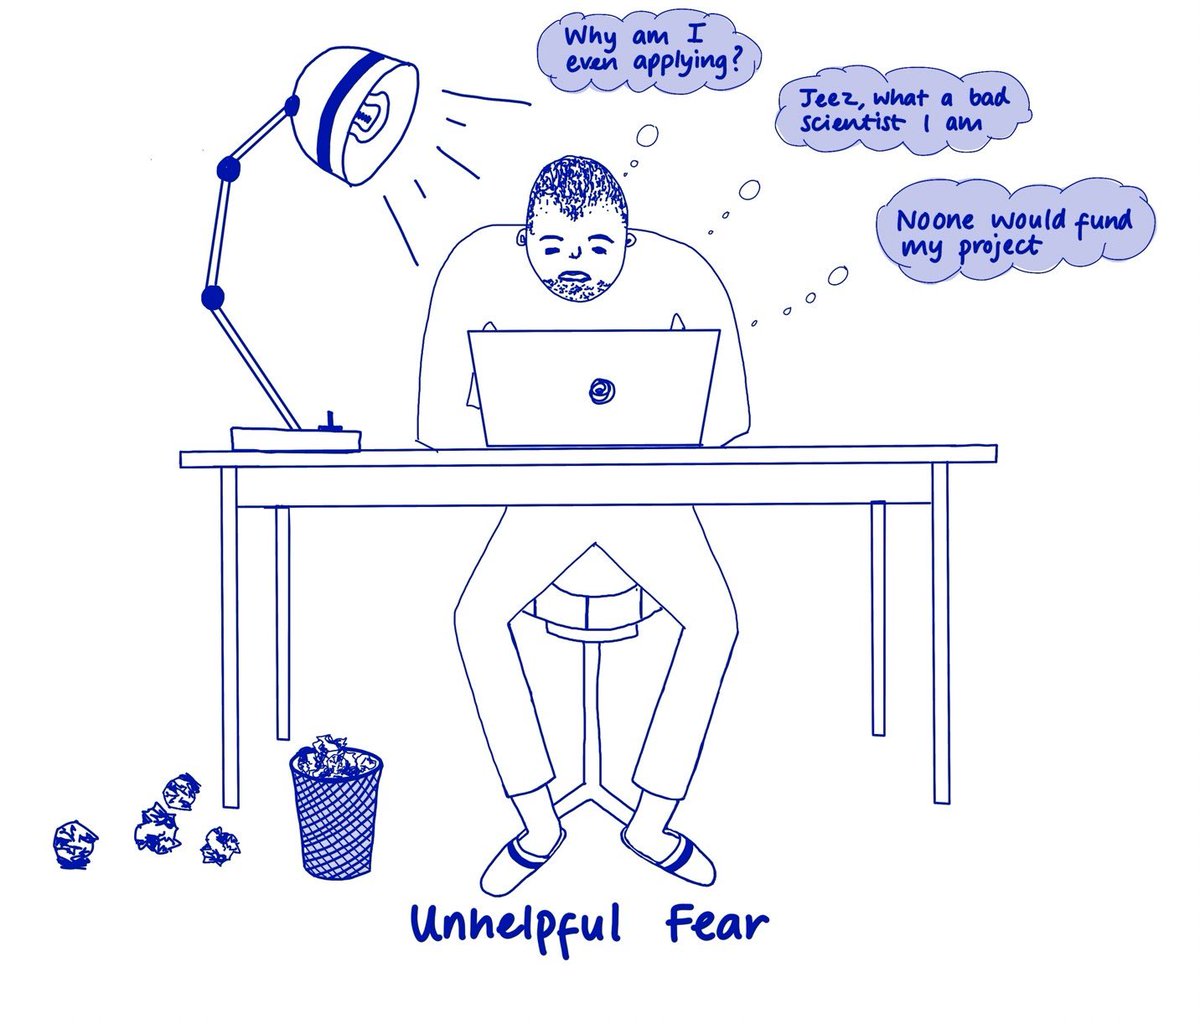 This week in ‘Science without anguish’: The high cost of fear in research sciencewithoutanguish.com/blog/the-high-… Thanks to @_alicewhite for illustrations